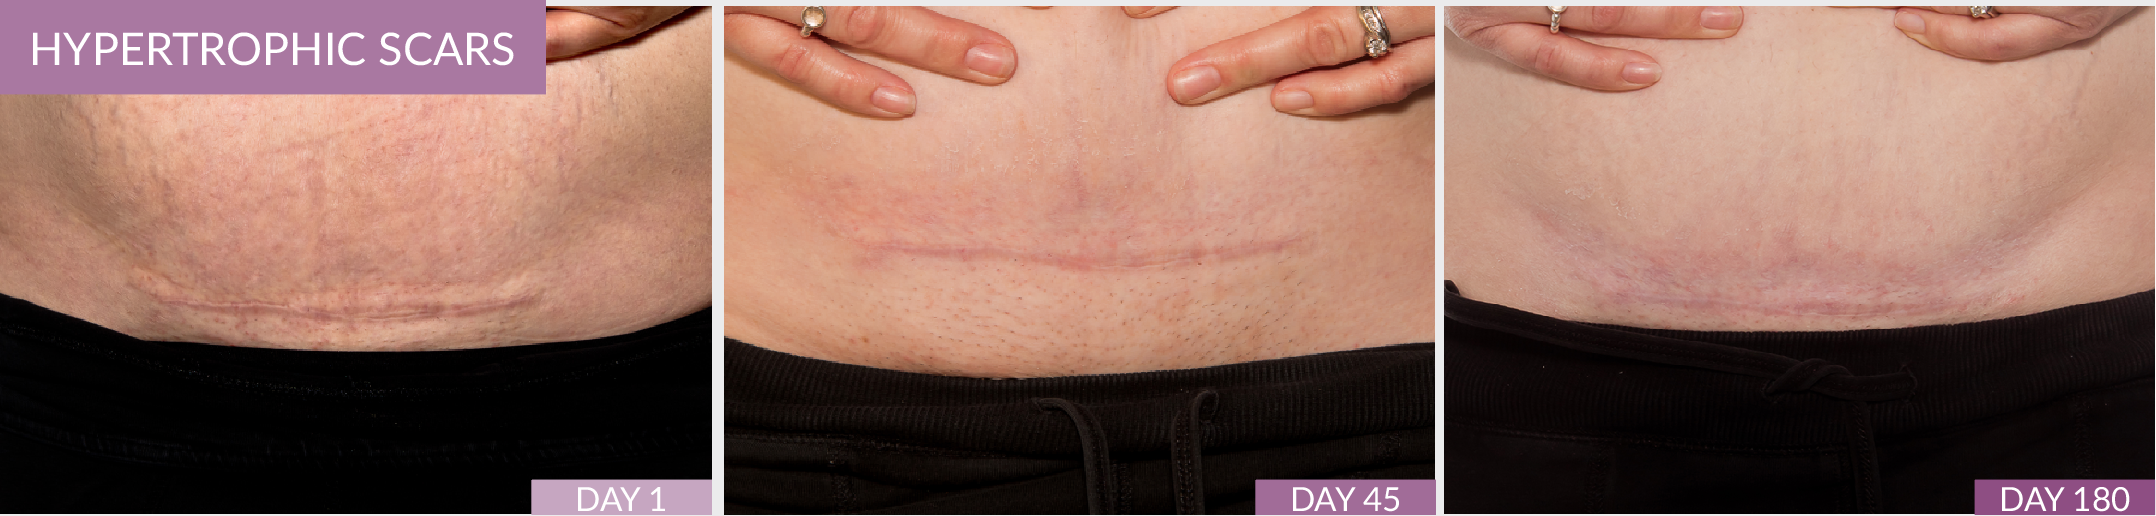 Hypertrophic Scars C-Section Scar Fusion Pharmacy